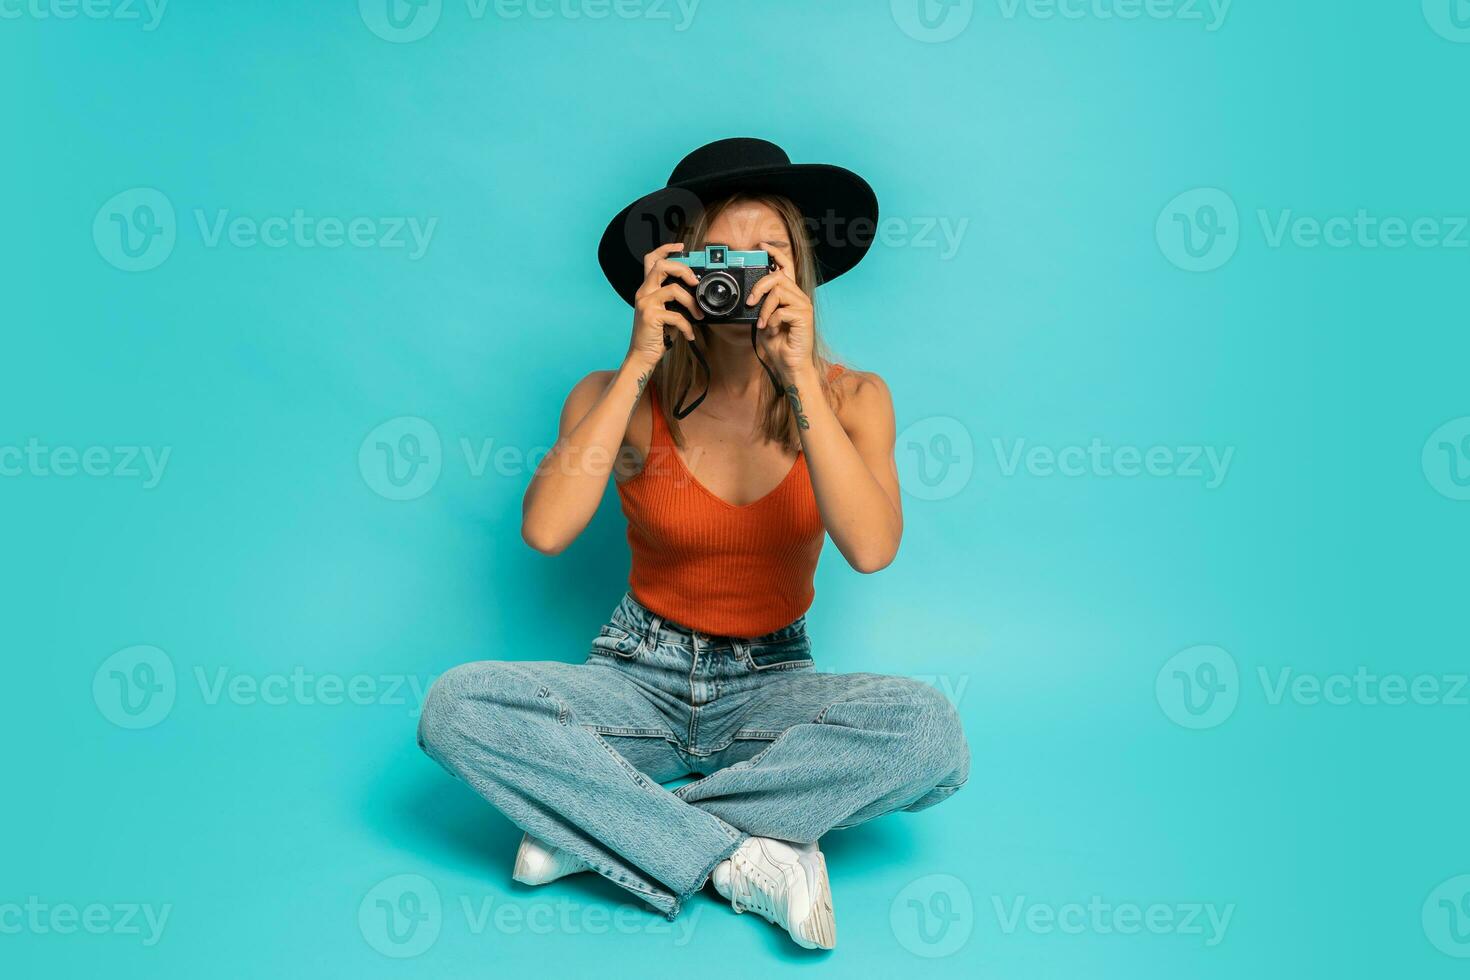 Lovely blond woman in  stylish summer outfit holding retro camera , sitting on floor in studio on blue background. Vacation mood. photo